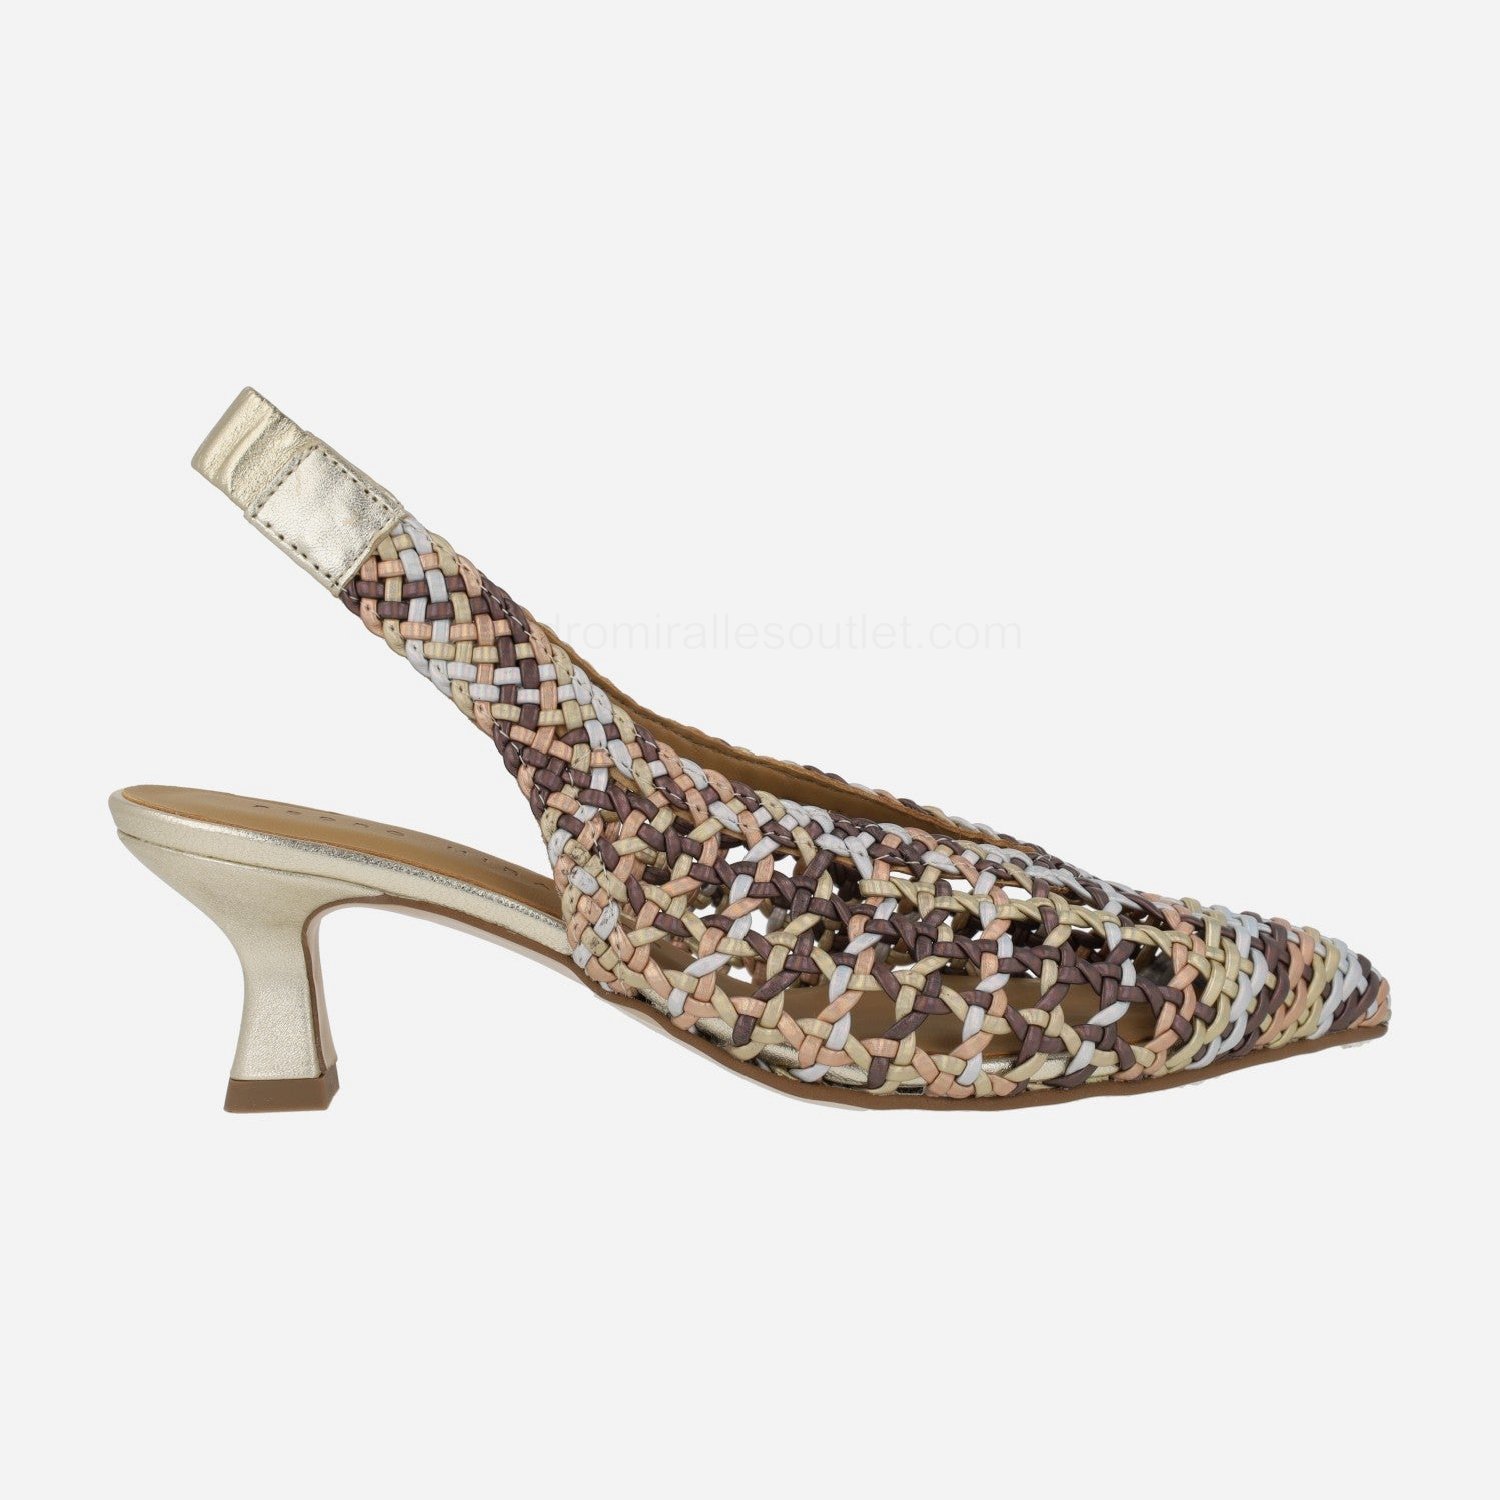 (image for) Braided leather pumps Guadalquivir in multicolor metallic | pedro miralles outlet-1764